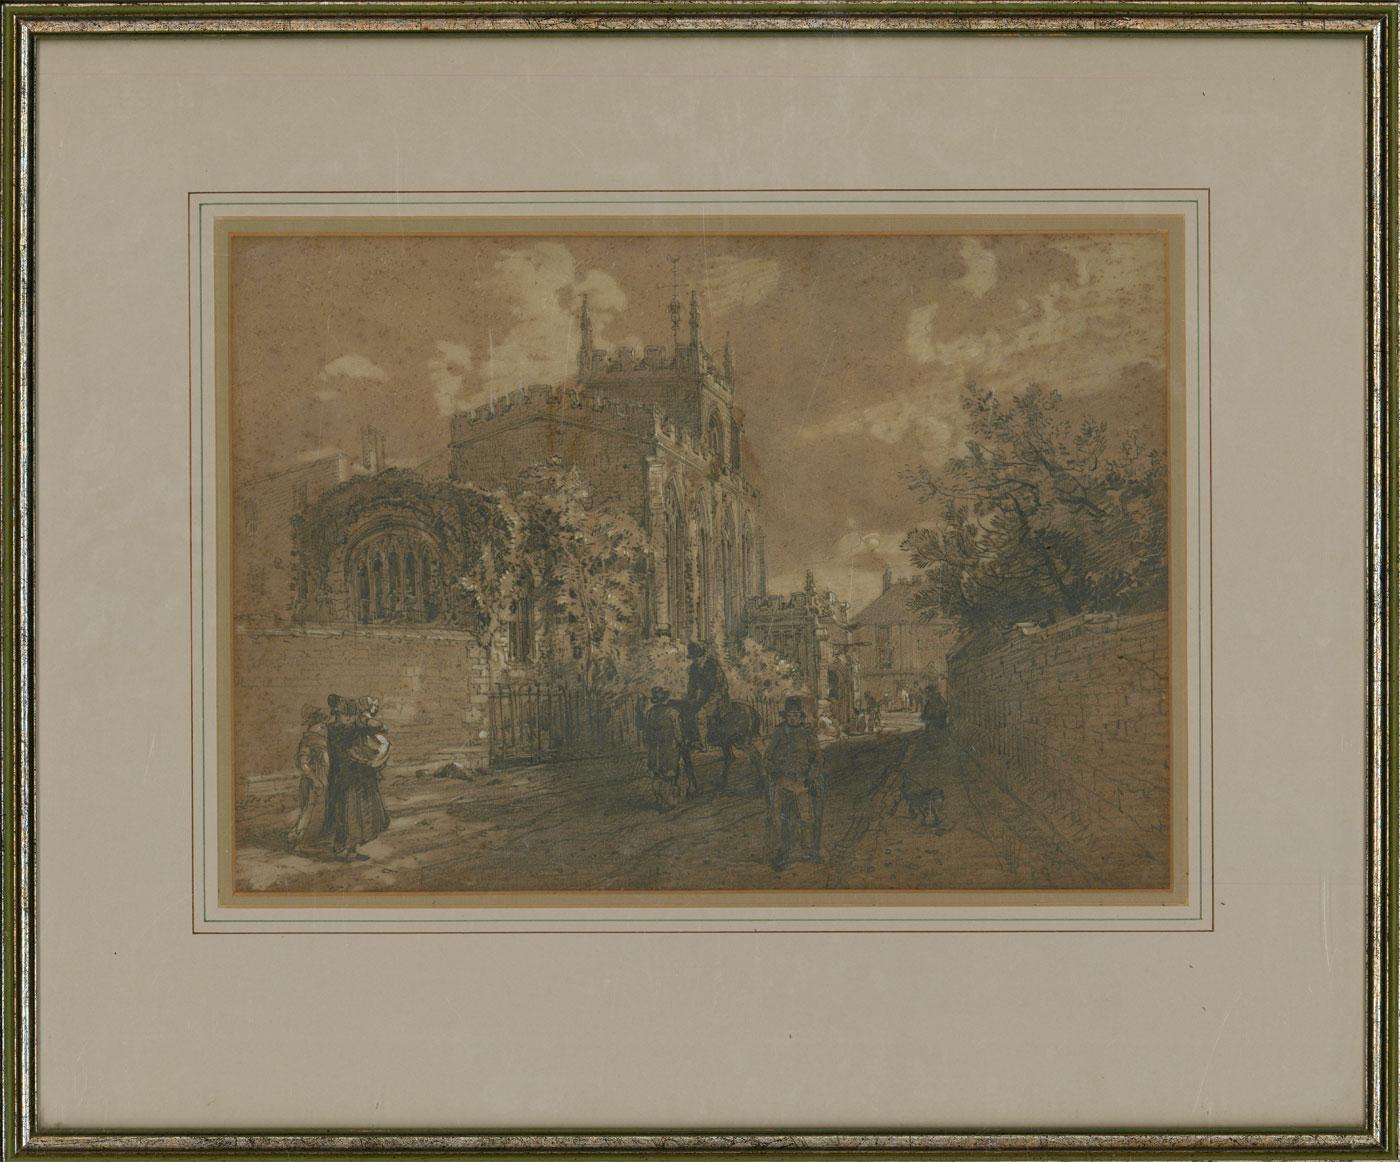 Unknown Landscape Art - Framed Mid 19th Century Graphite Drawing - English Church Lane